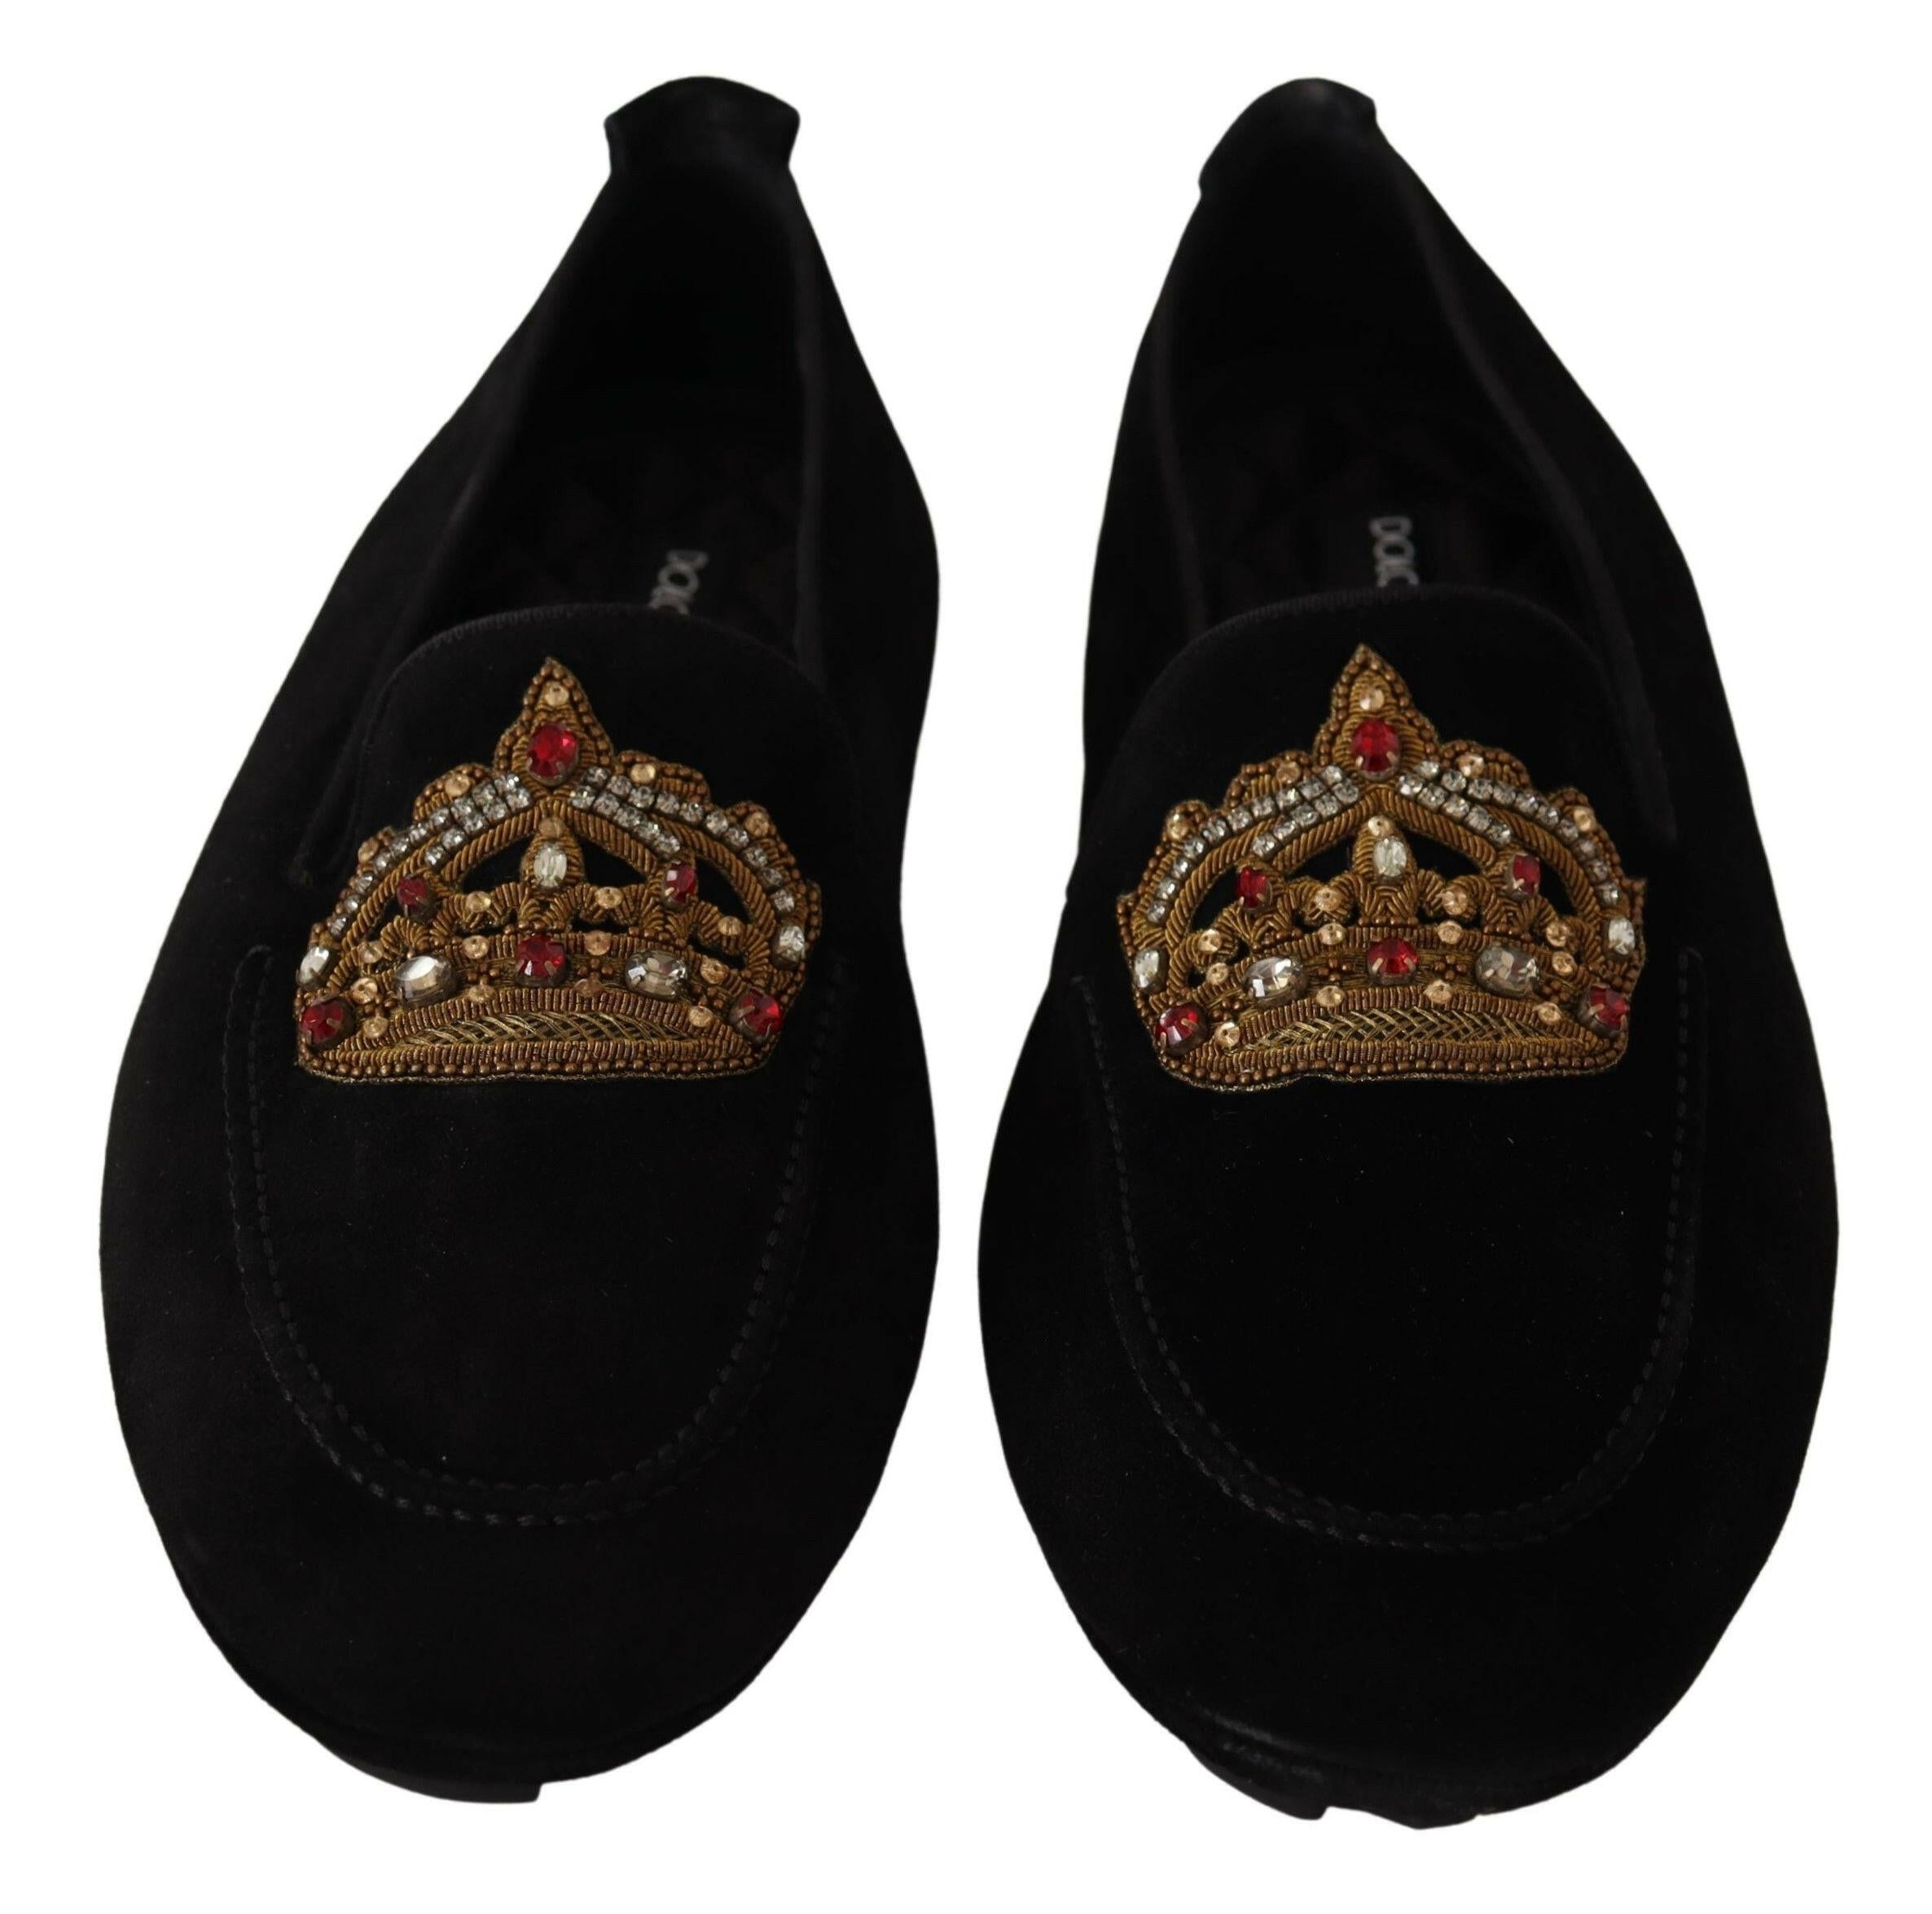 Dolce & Gabbana Black Leather Crystal Gold Crown Loafers Shoes - GENUINE AUTHENTIC BRAND LLC  